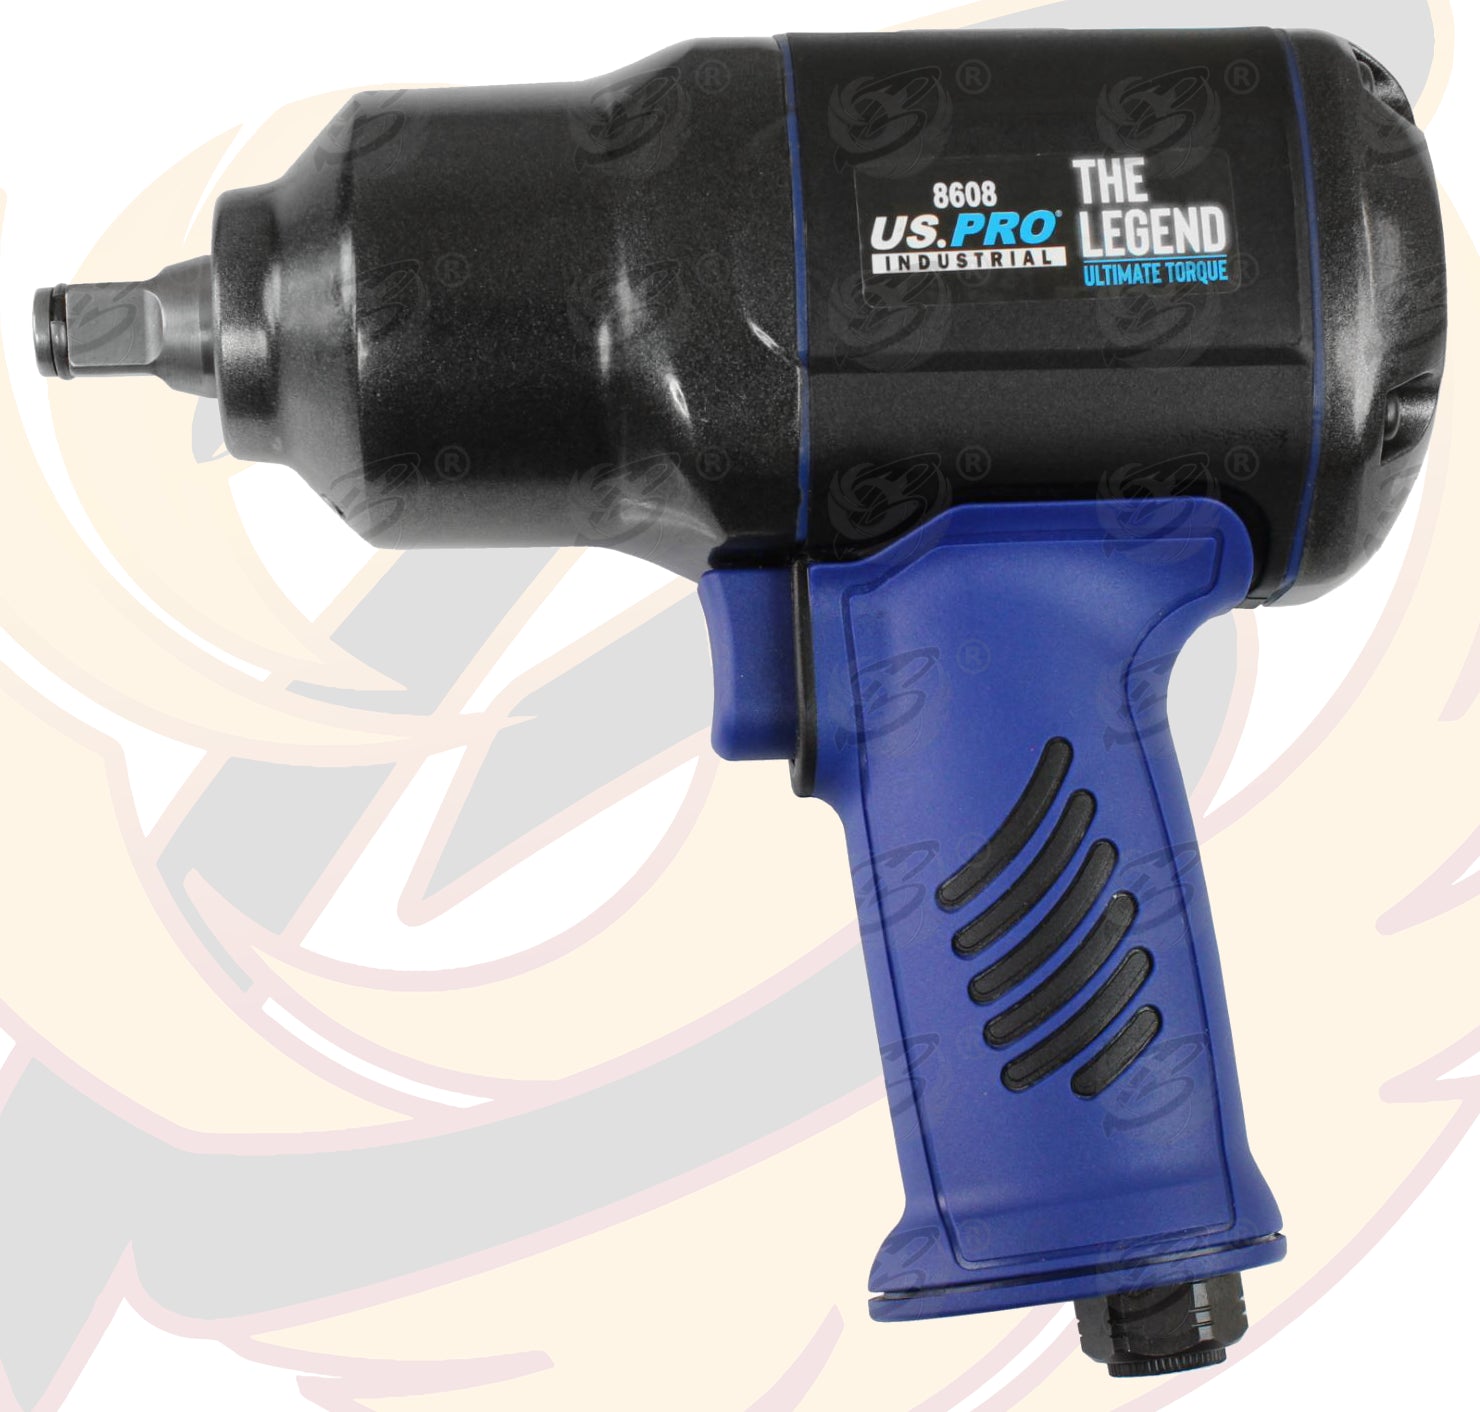 US PRO 1/2" DRIVE AIR IMPACT WRENCH 1700Nm ( THE LEGEND )